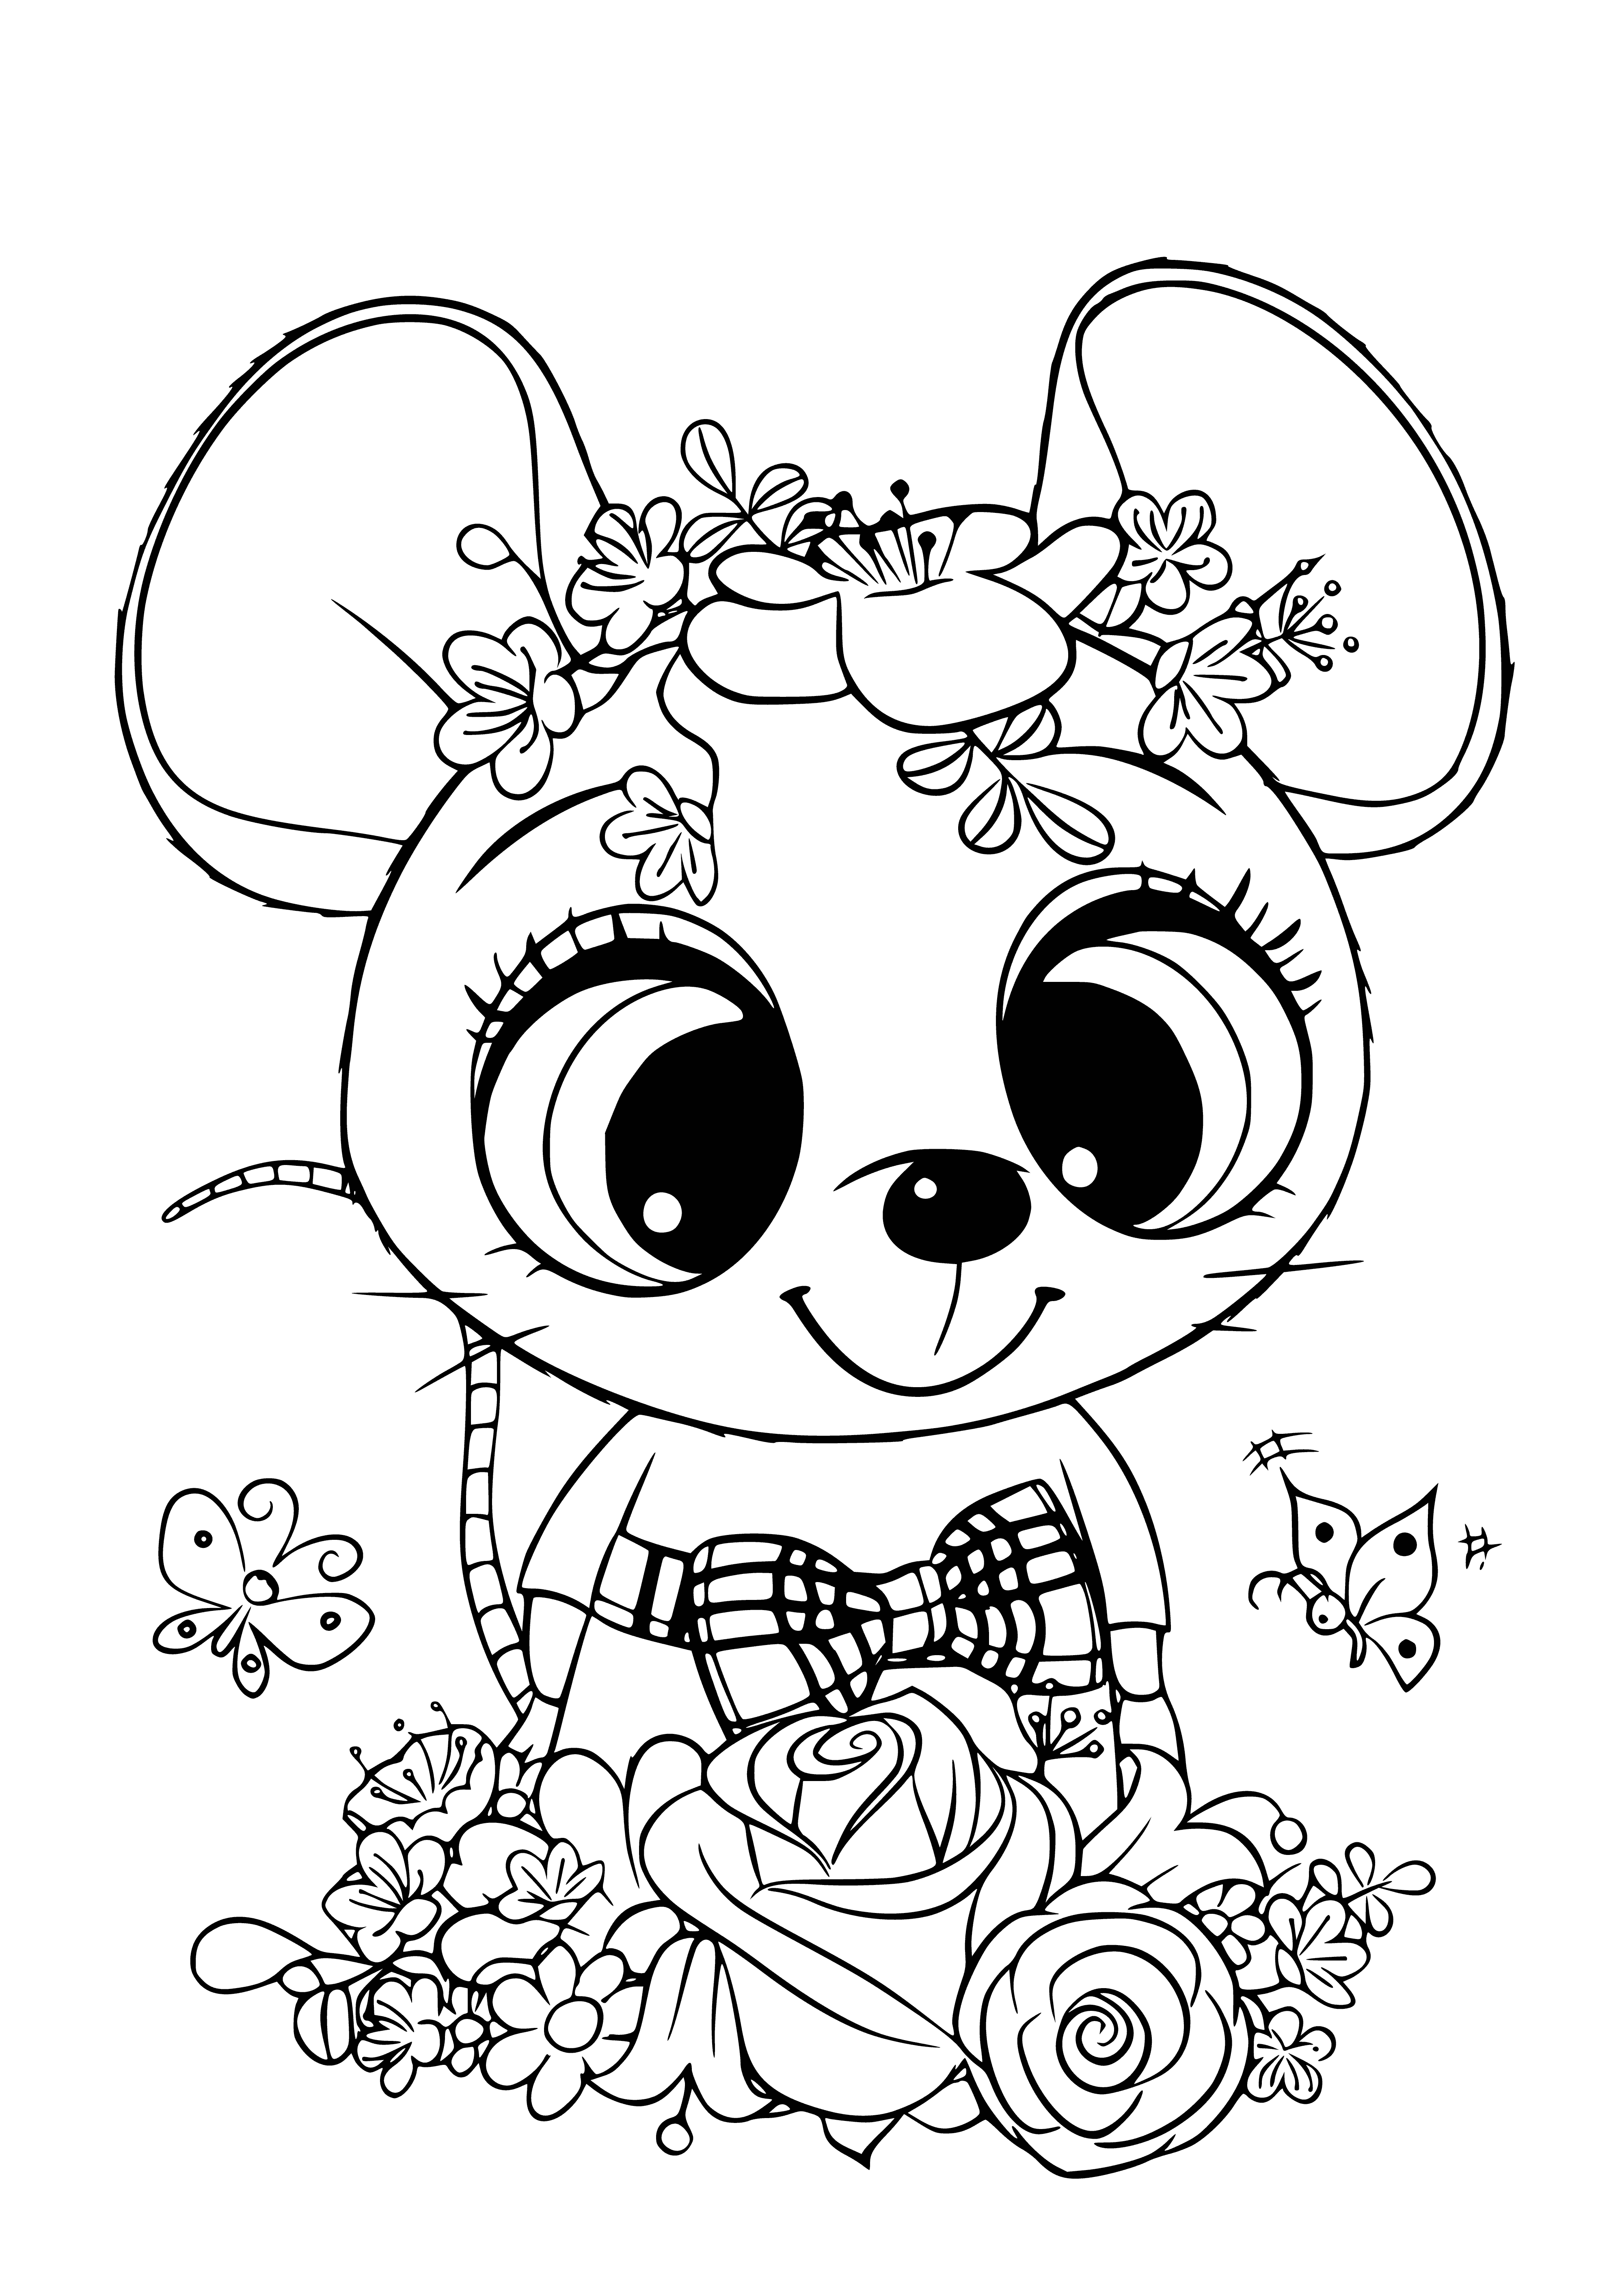 coloring page: Cute mouse wearing bowtie and holding a heart! Kawaii big eyes and pink cheeks make it extra special. #coloringpage